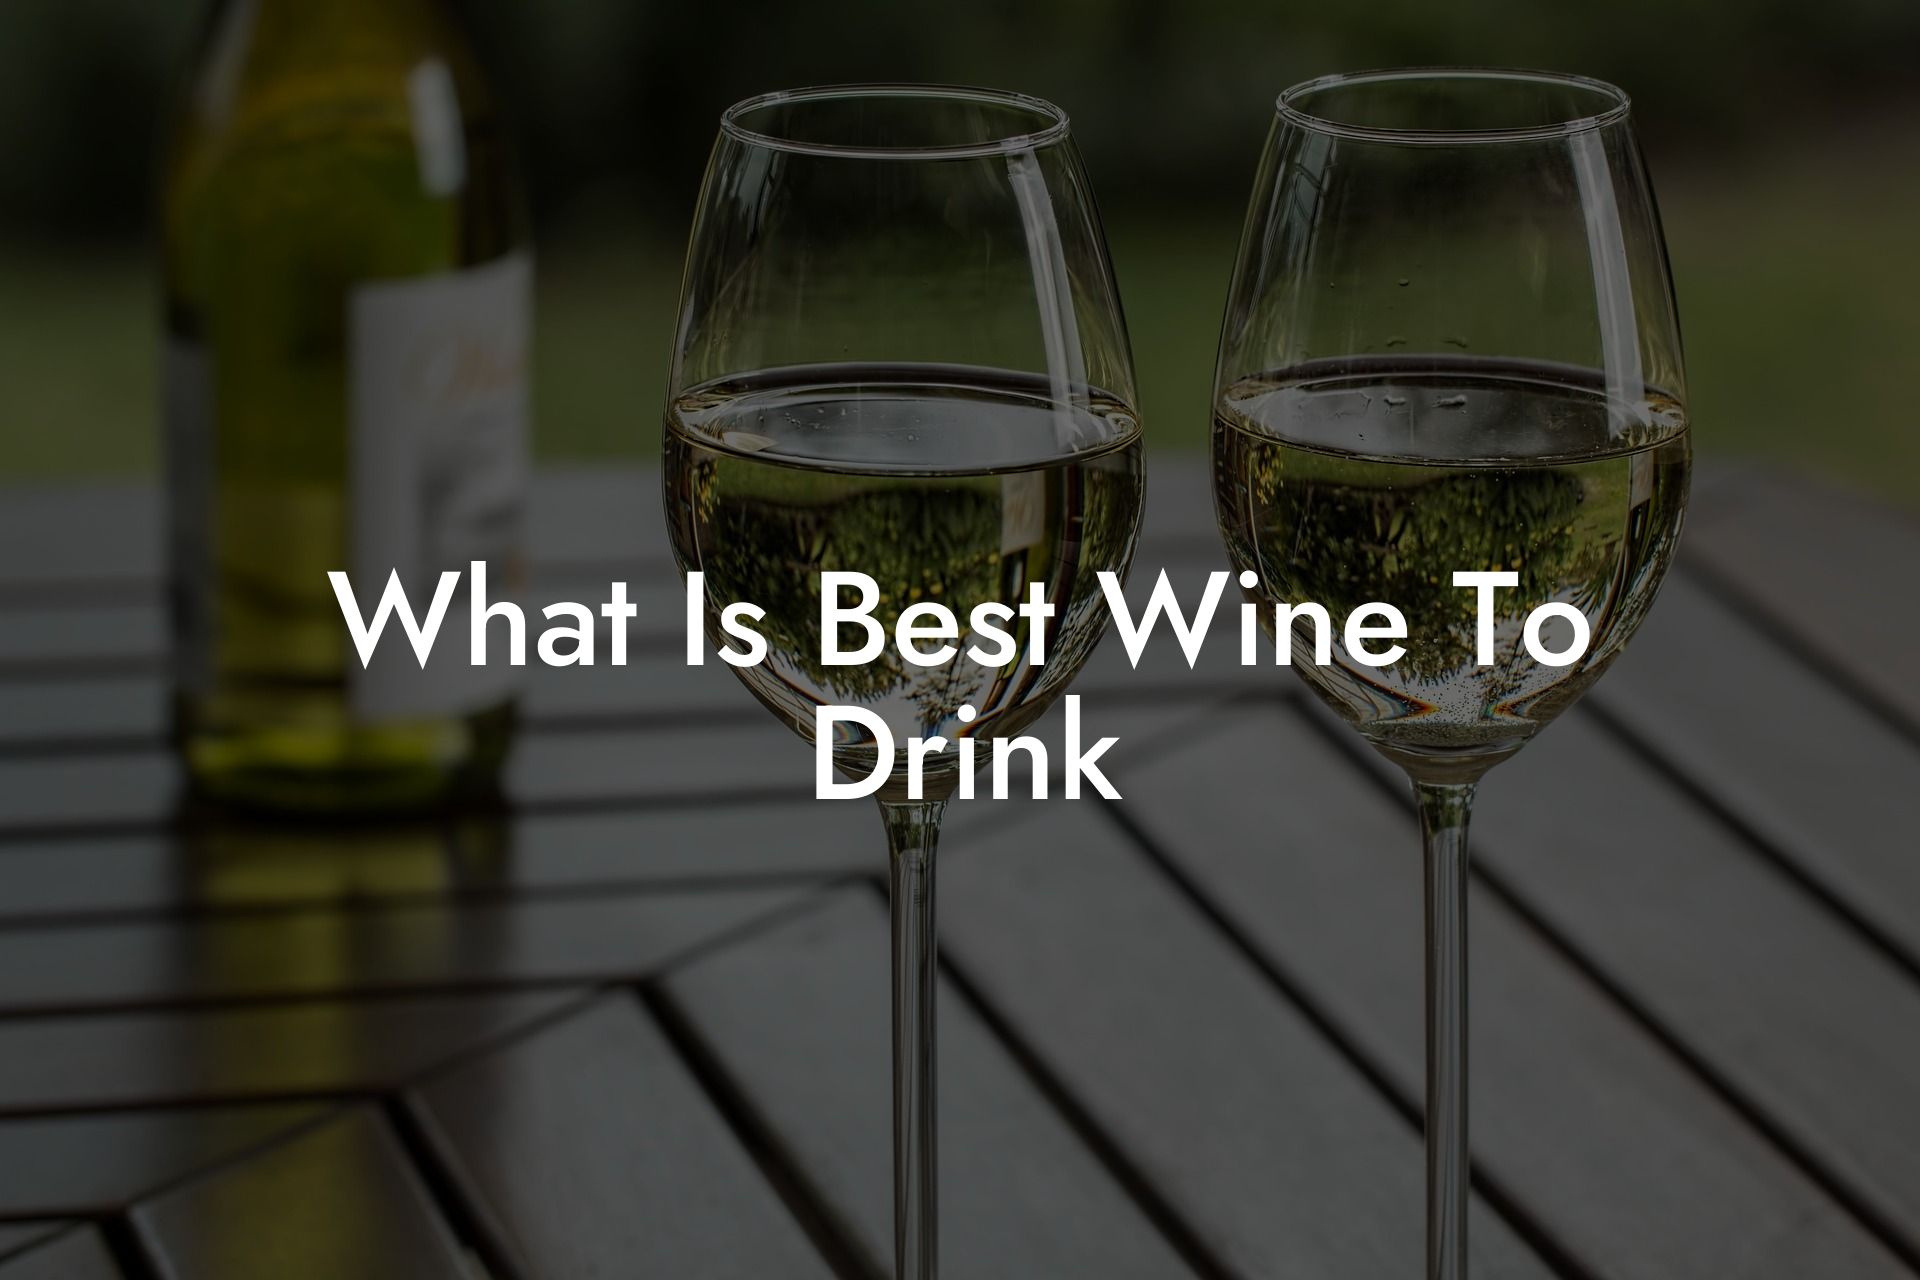 What Is Best Wine To Drink